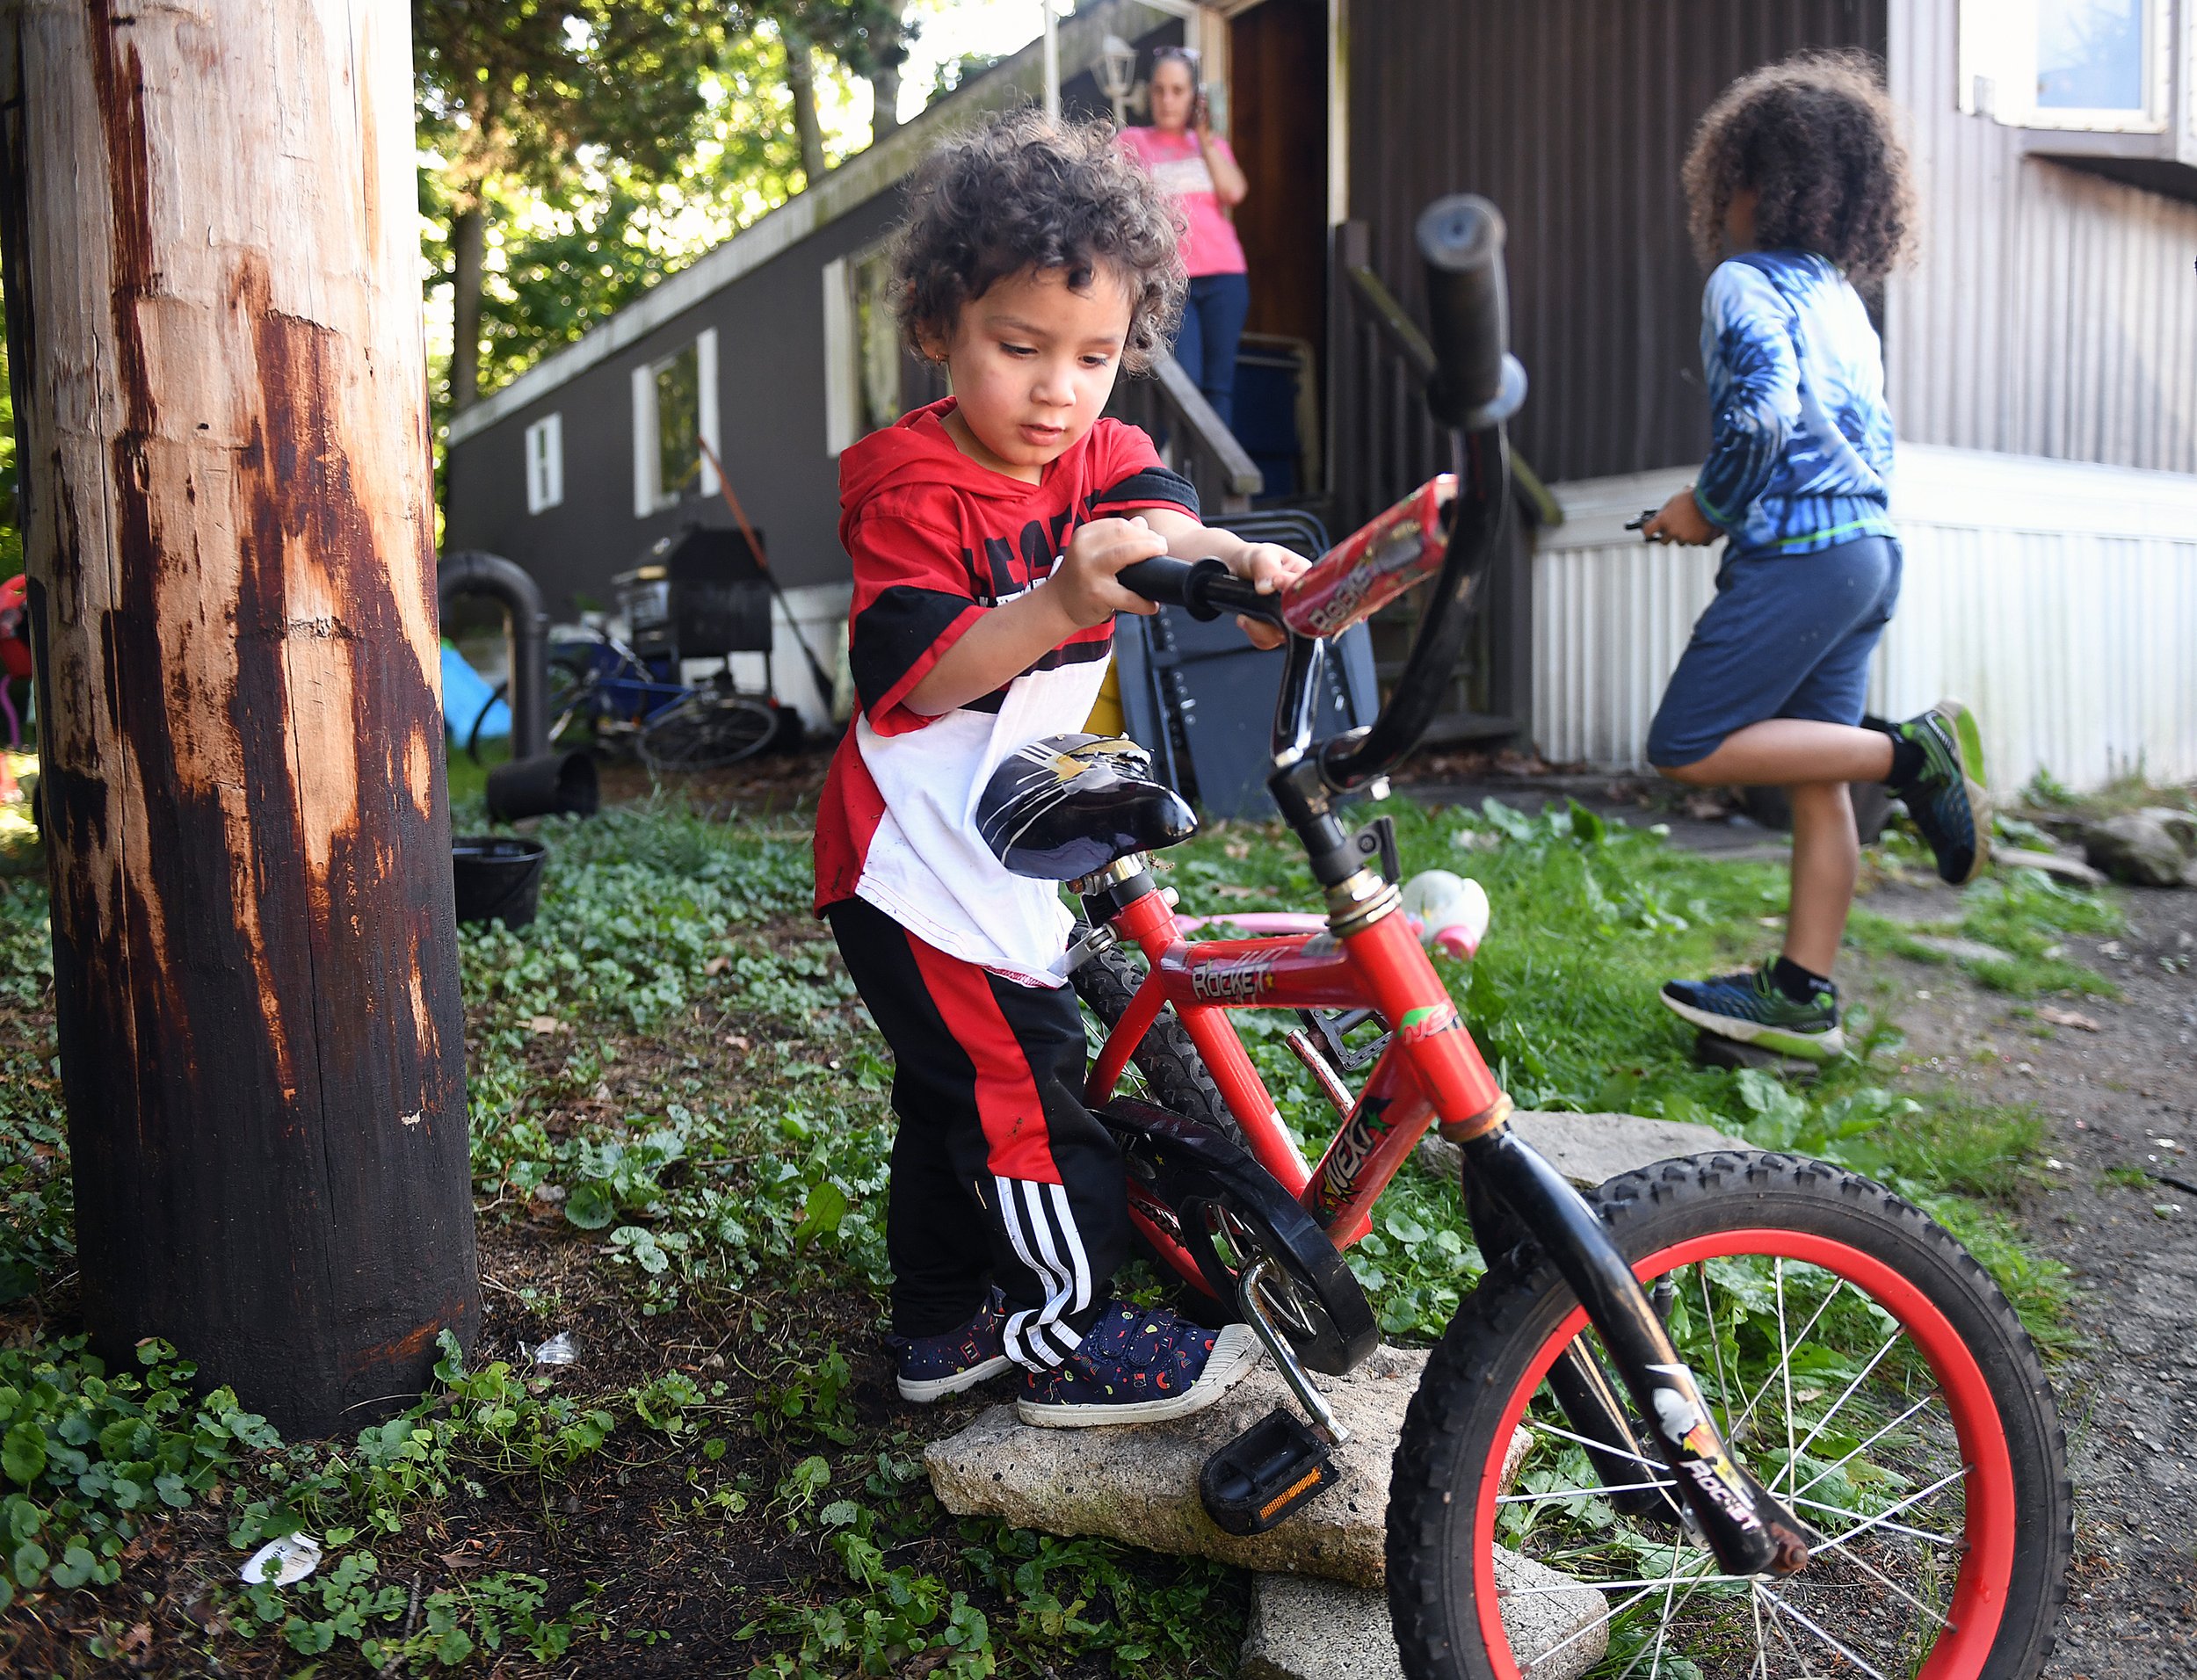  Emerson Valero plays with a bike outside his home in Groton on Wednesday, June 22, 2022.  His mother Aleshia Valero, who lived at New London’s Crystal Avenue High Rises just before they closed, now lives in a two-bedroom trailer she owns with her fo